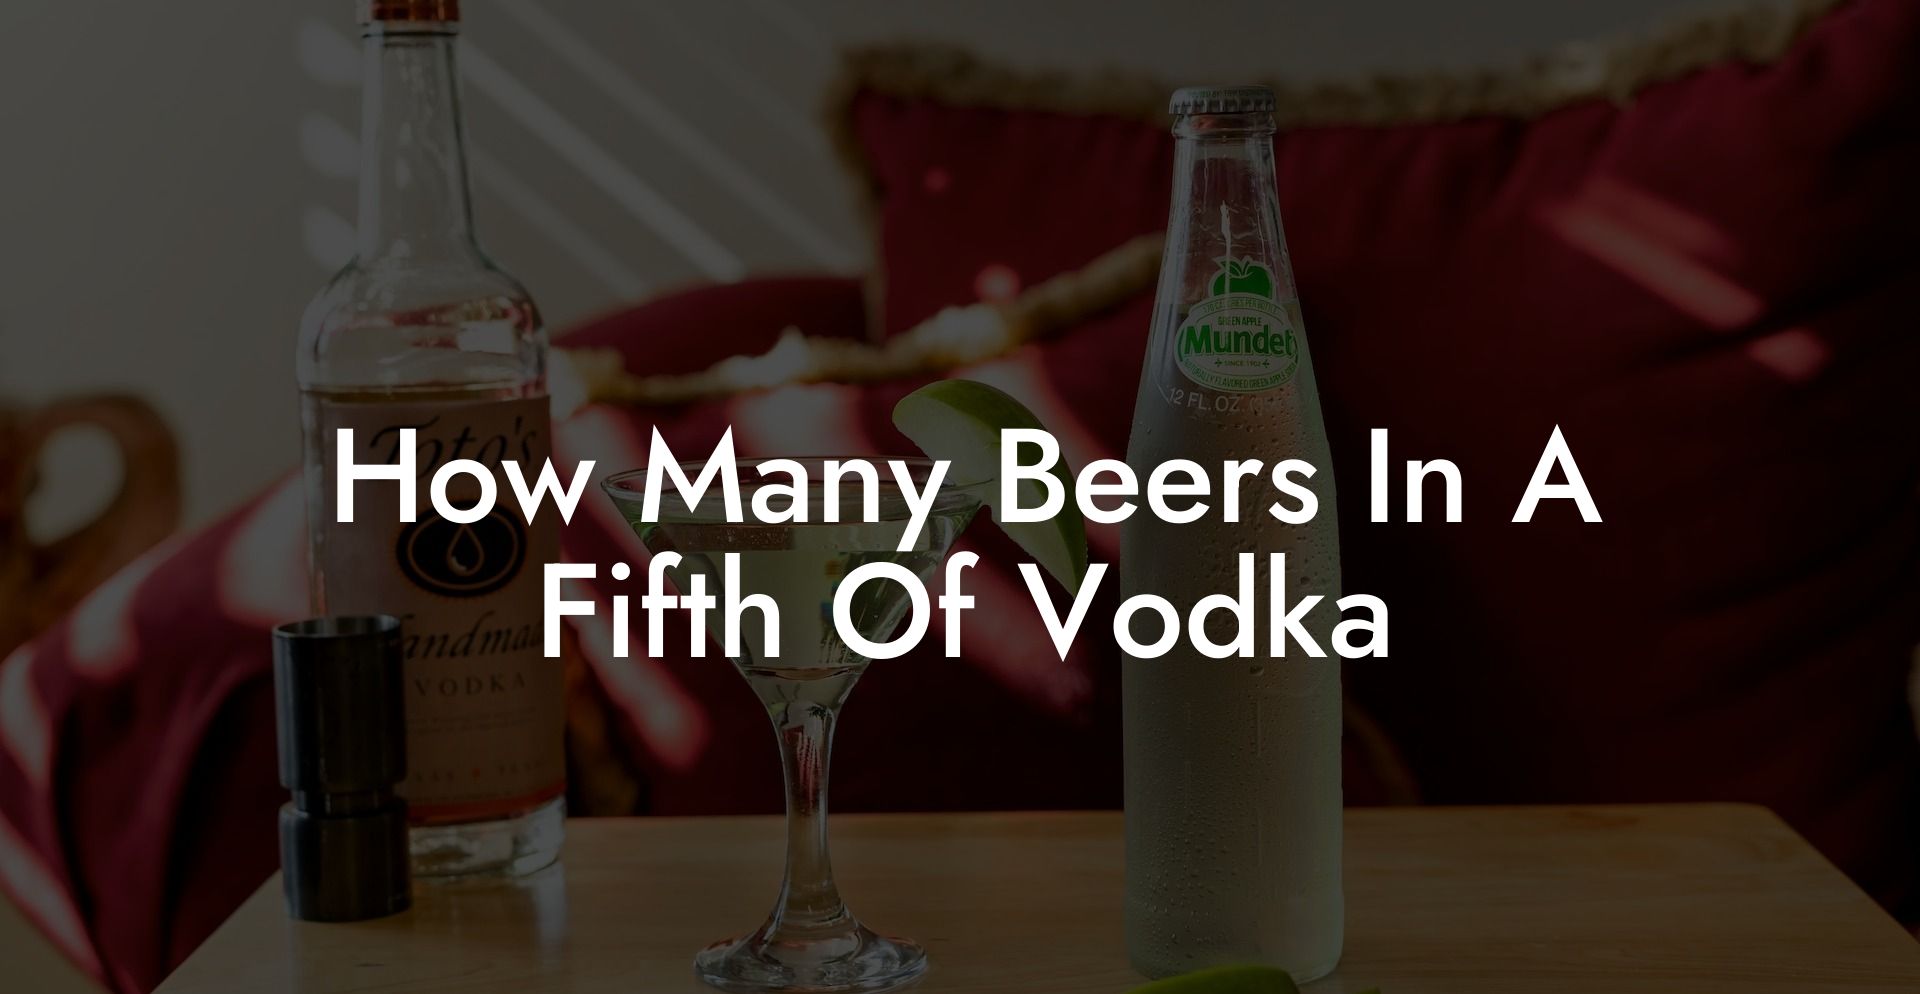 How Many Beers In A Fifth Of Vodka